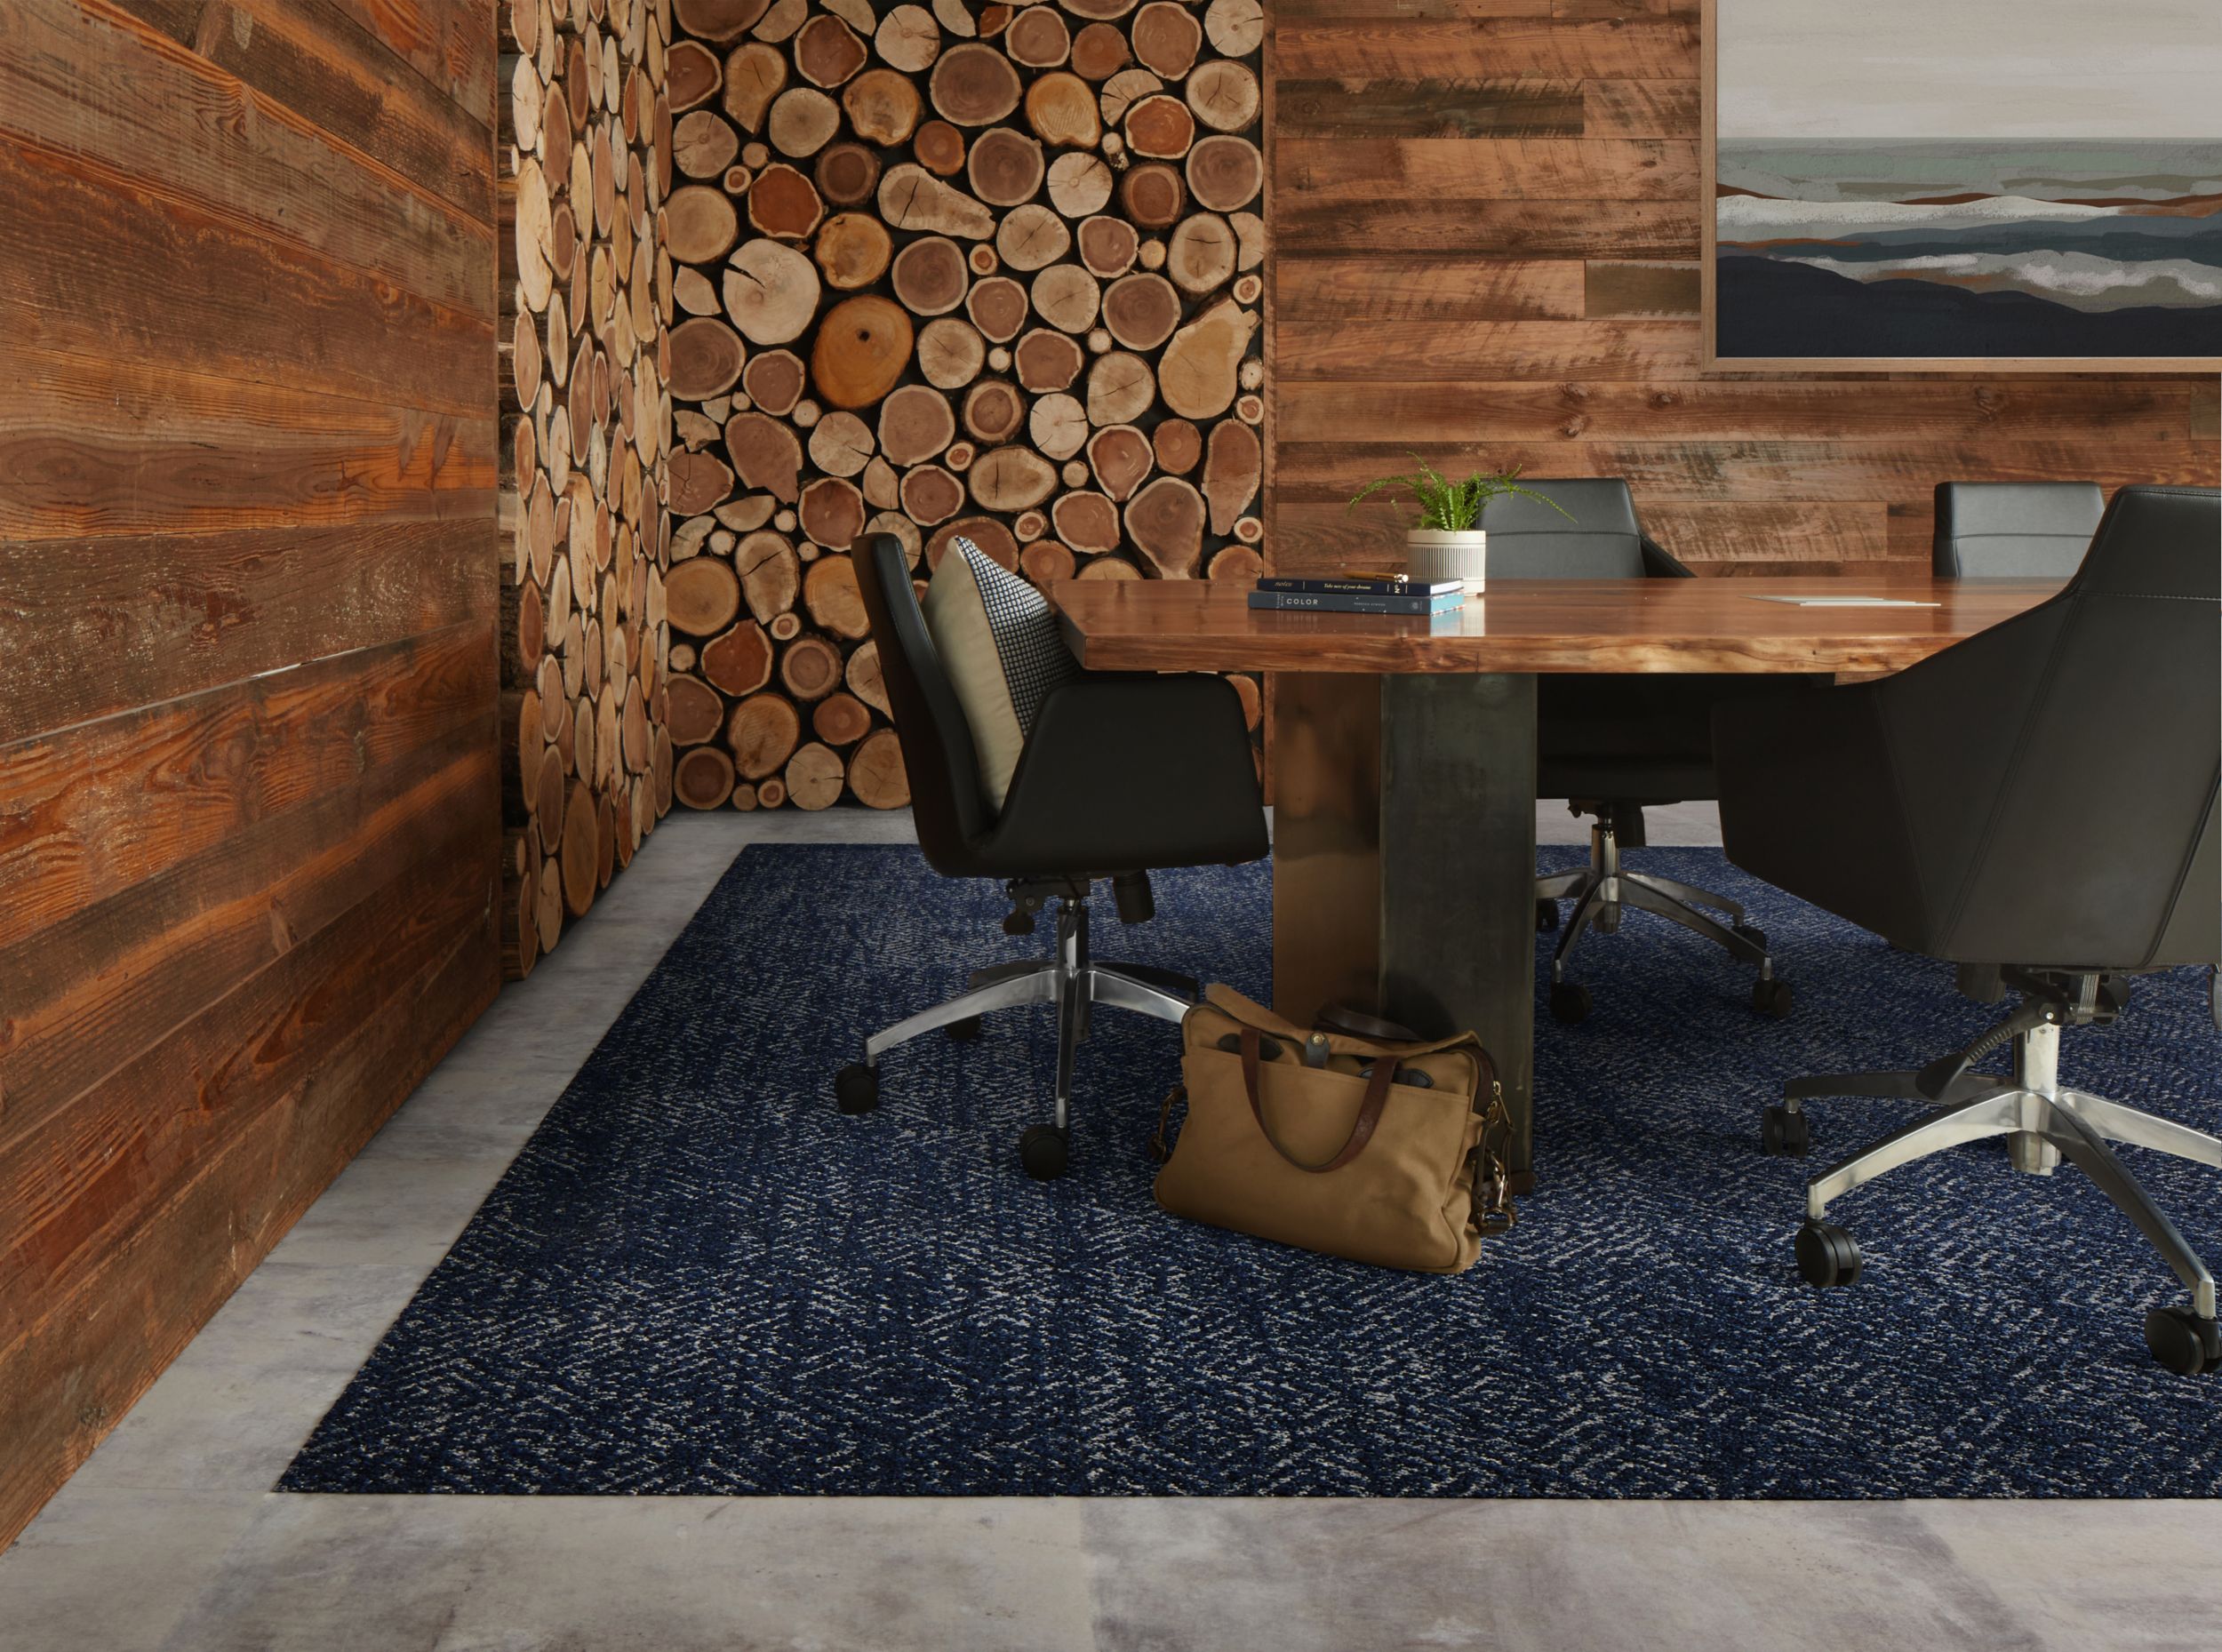 Interface Third Space 309 carpet tile with Textured Stones LVT in meeting room with wood walls and accents numéro d’image 3